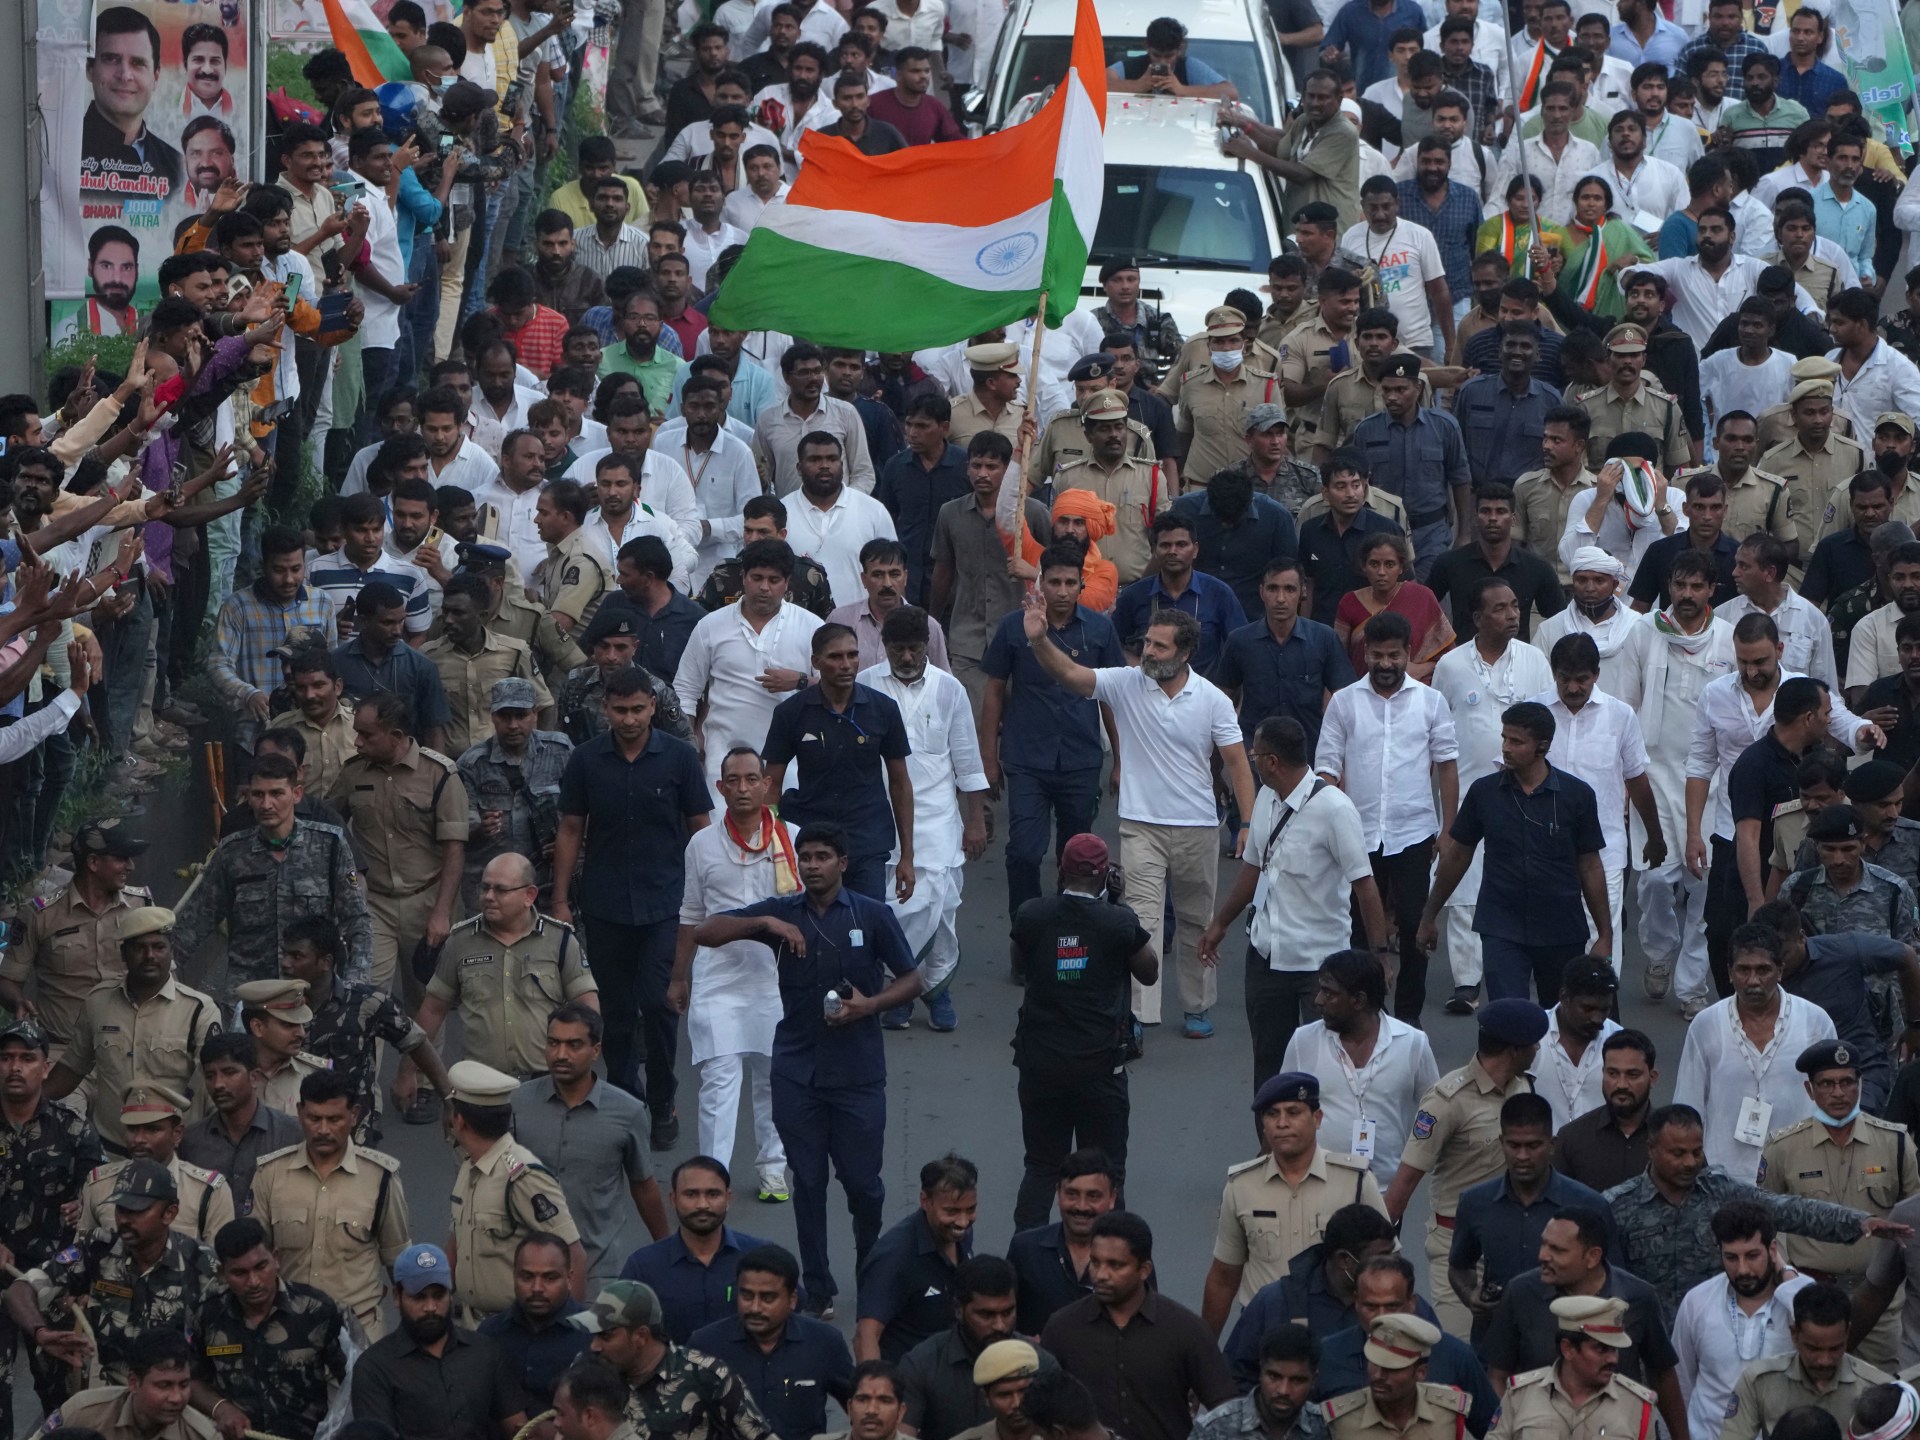 A ‘march to unite India’, led by Congress, reaches half-way mark